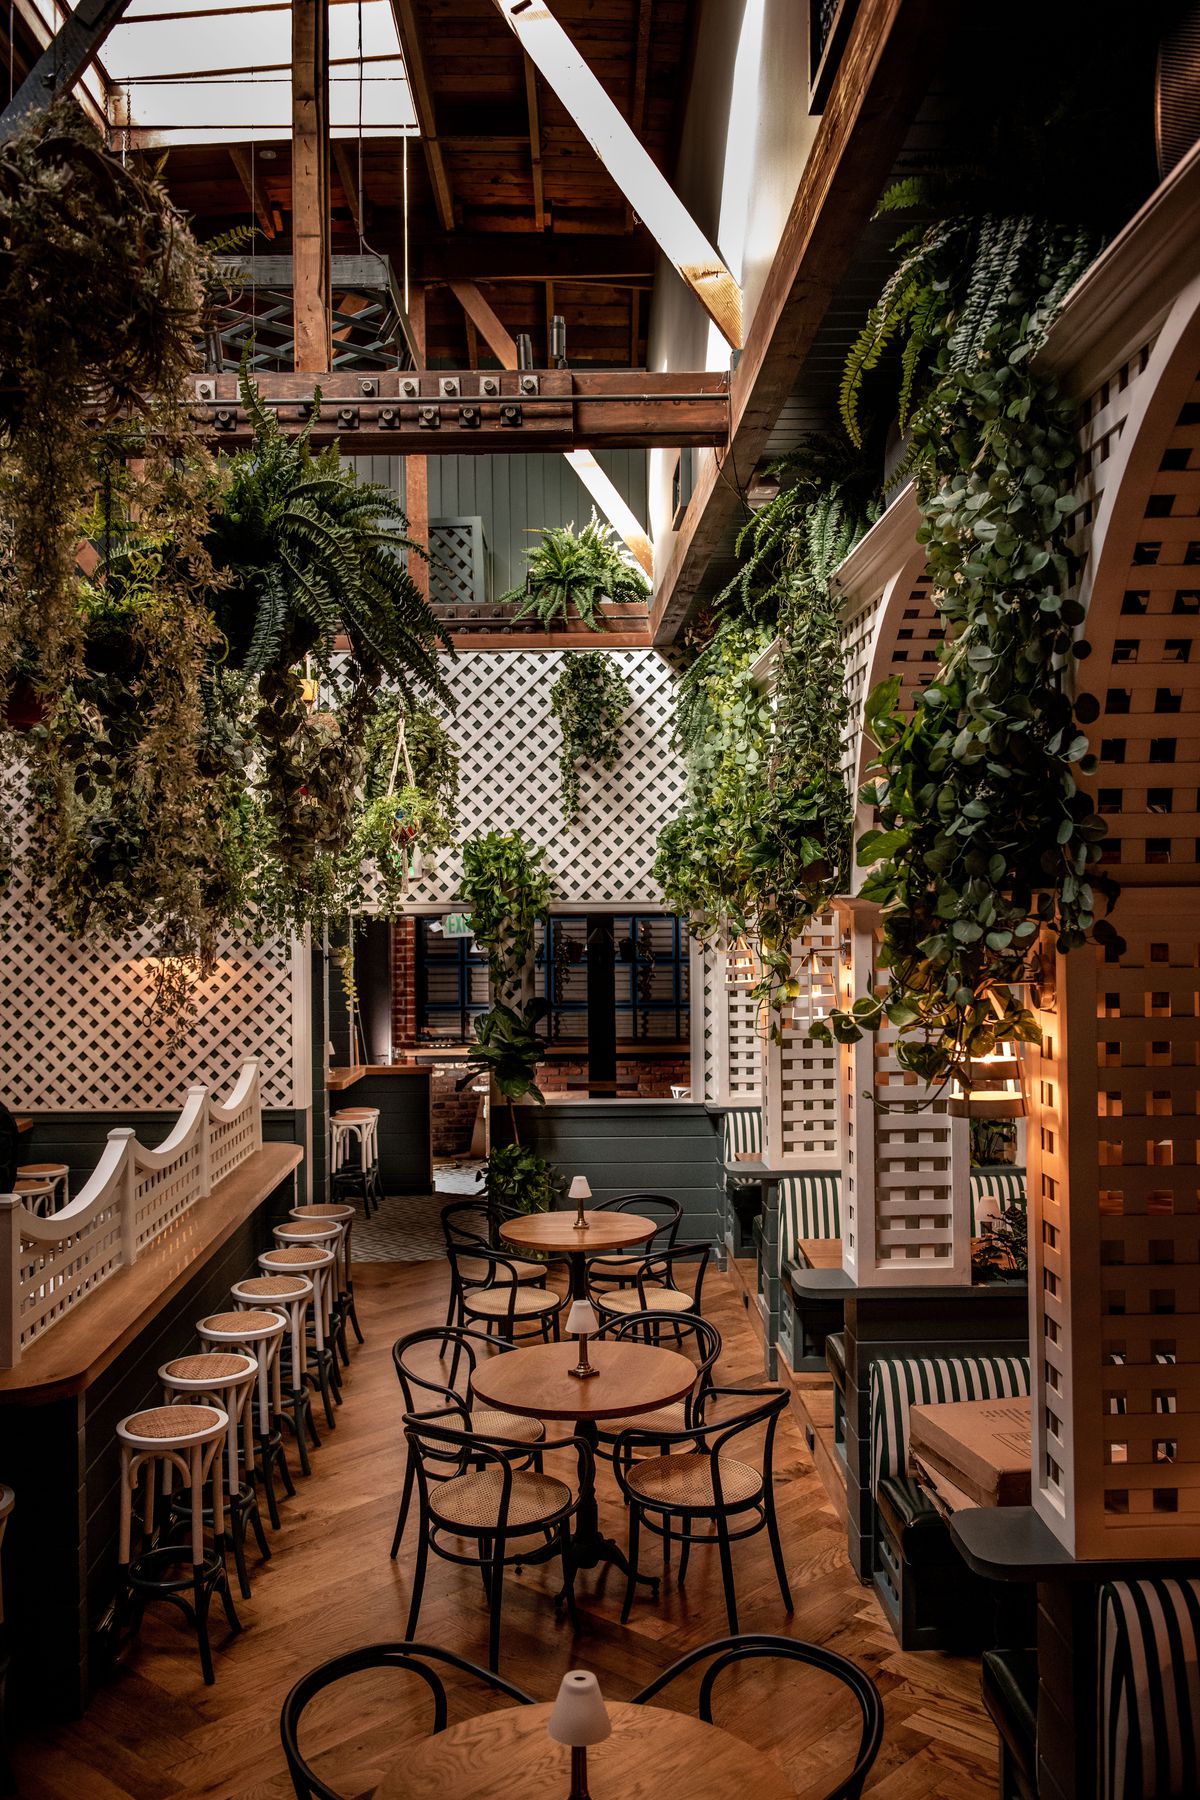 A vertical view of a leafy and wood-lined English-style restaurant and bar with tall ceilings and a skylight.